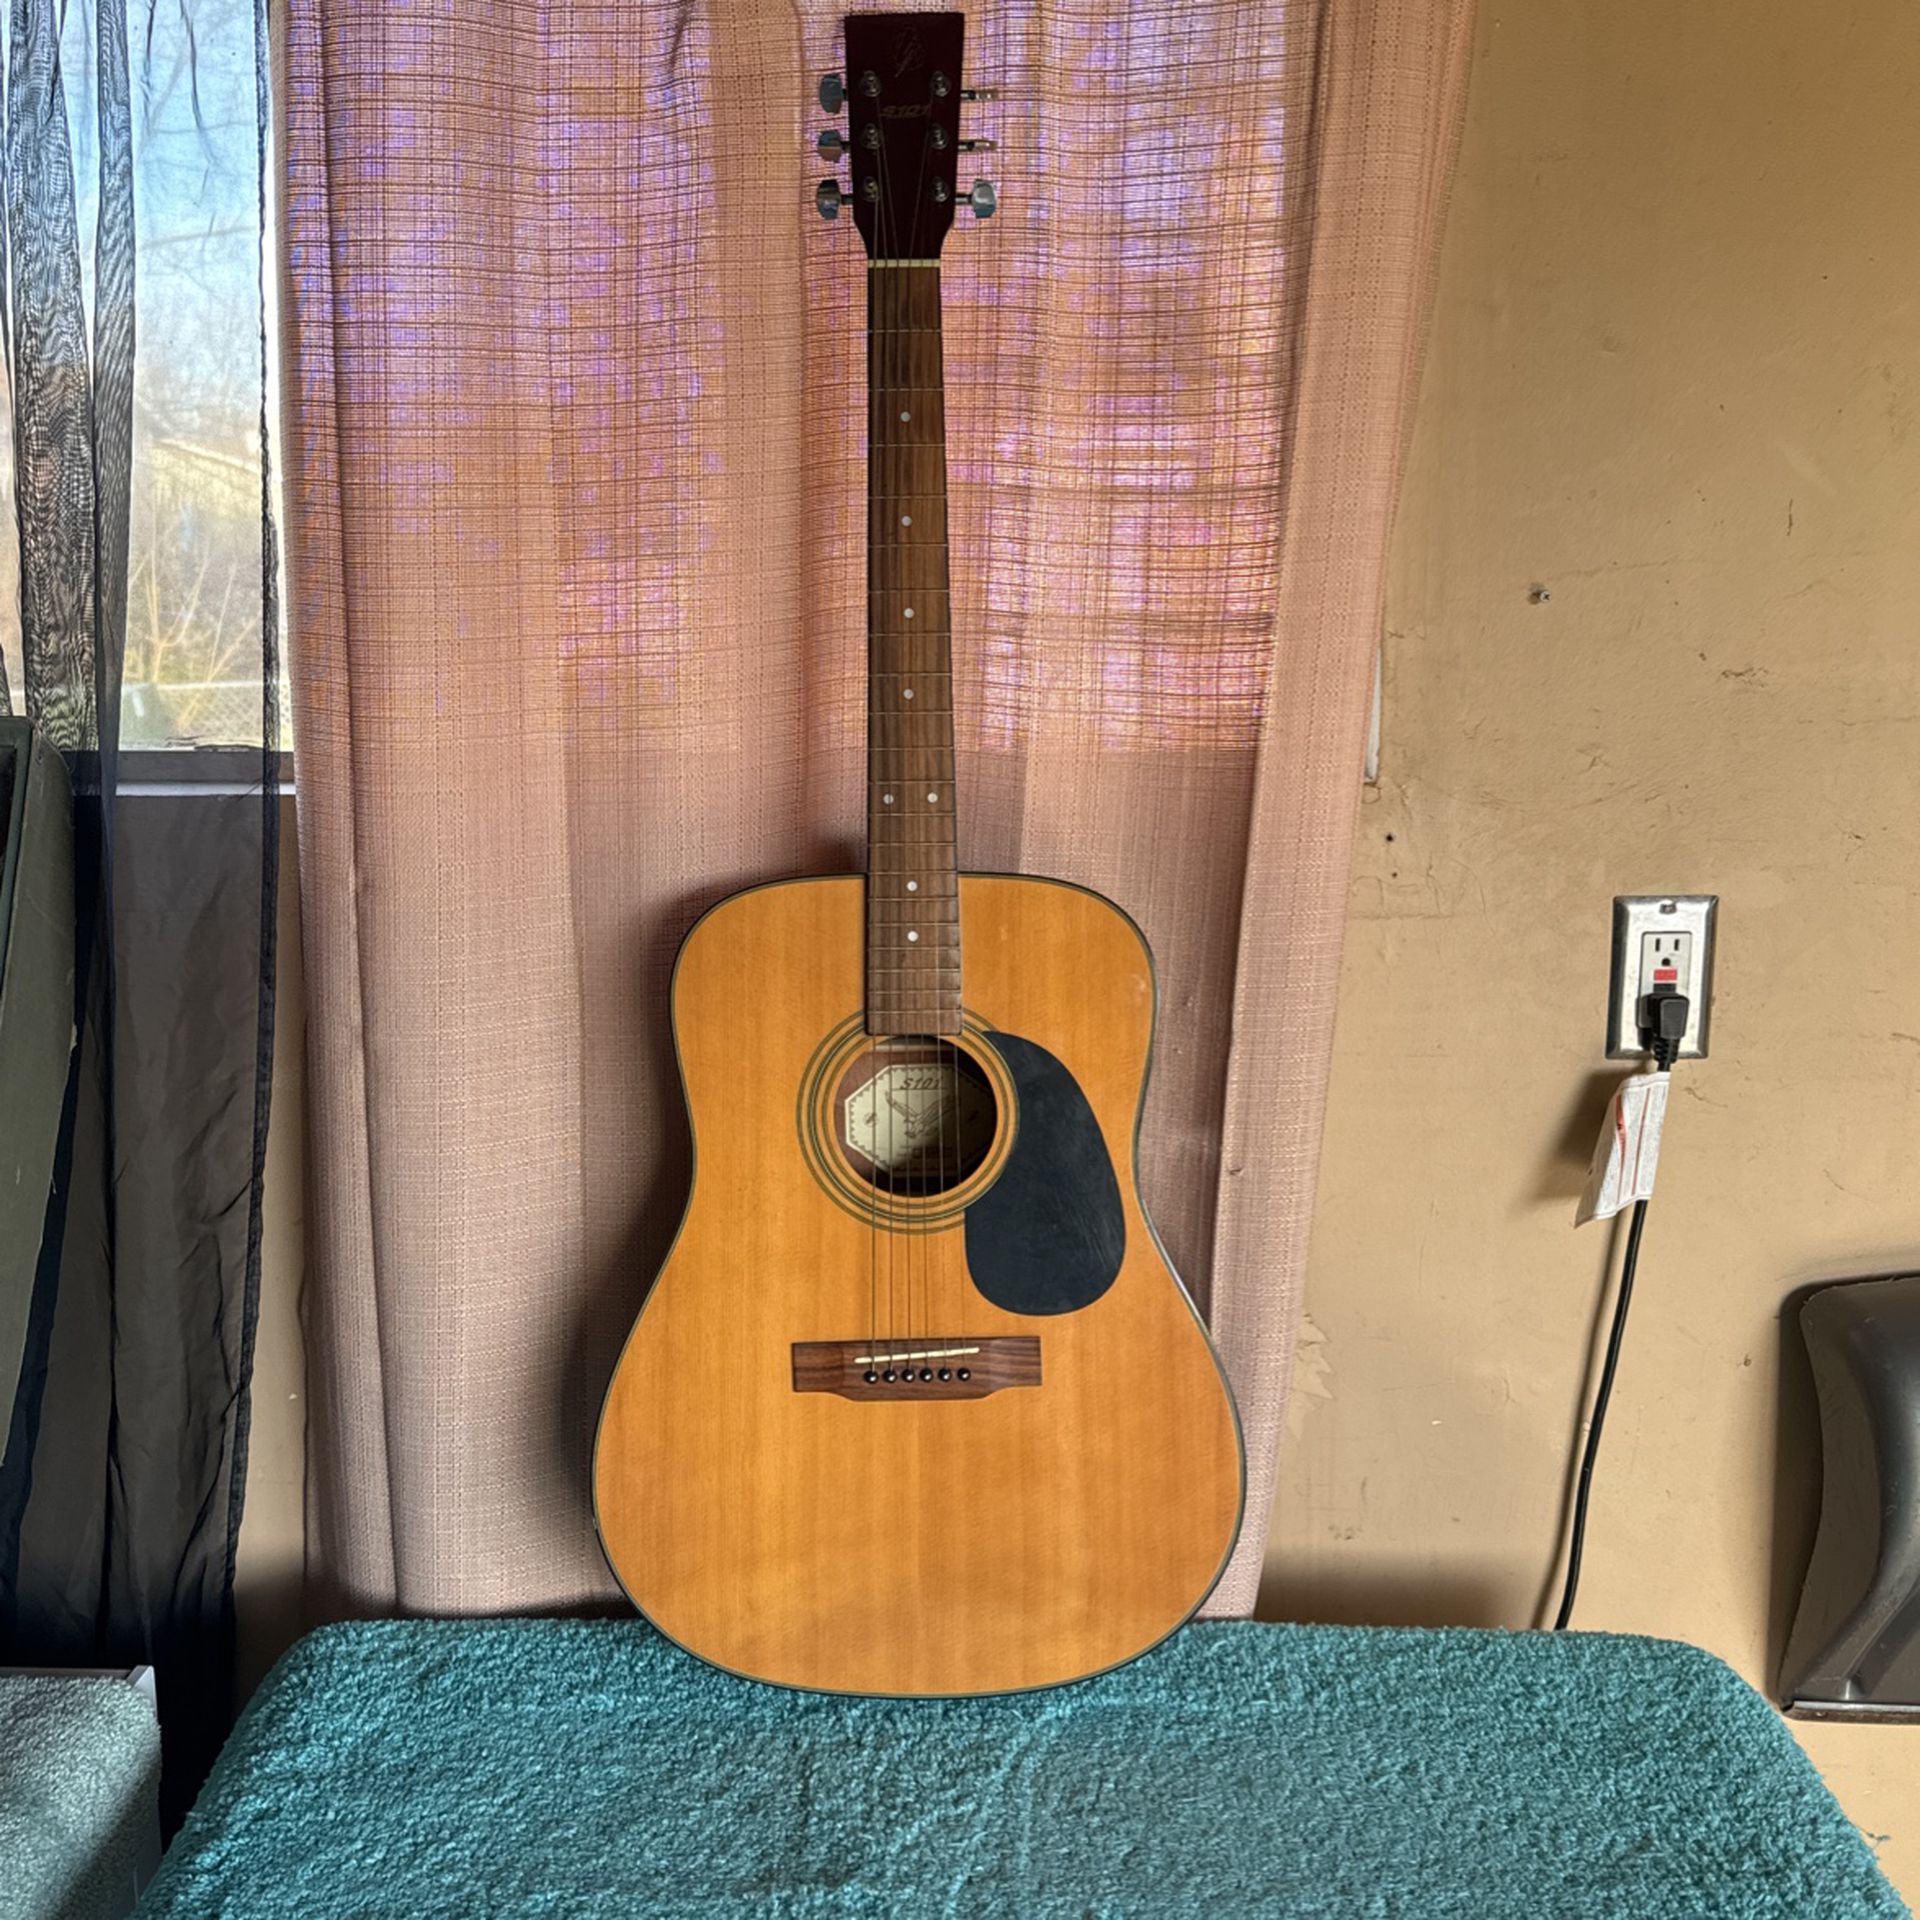 Fender Acoustic Guitar with Guitar Bag, FA-125 Dreadnought with Alloy Steel Strings, Glossed Natural Finish, Basswood Constructi